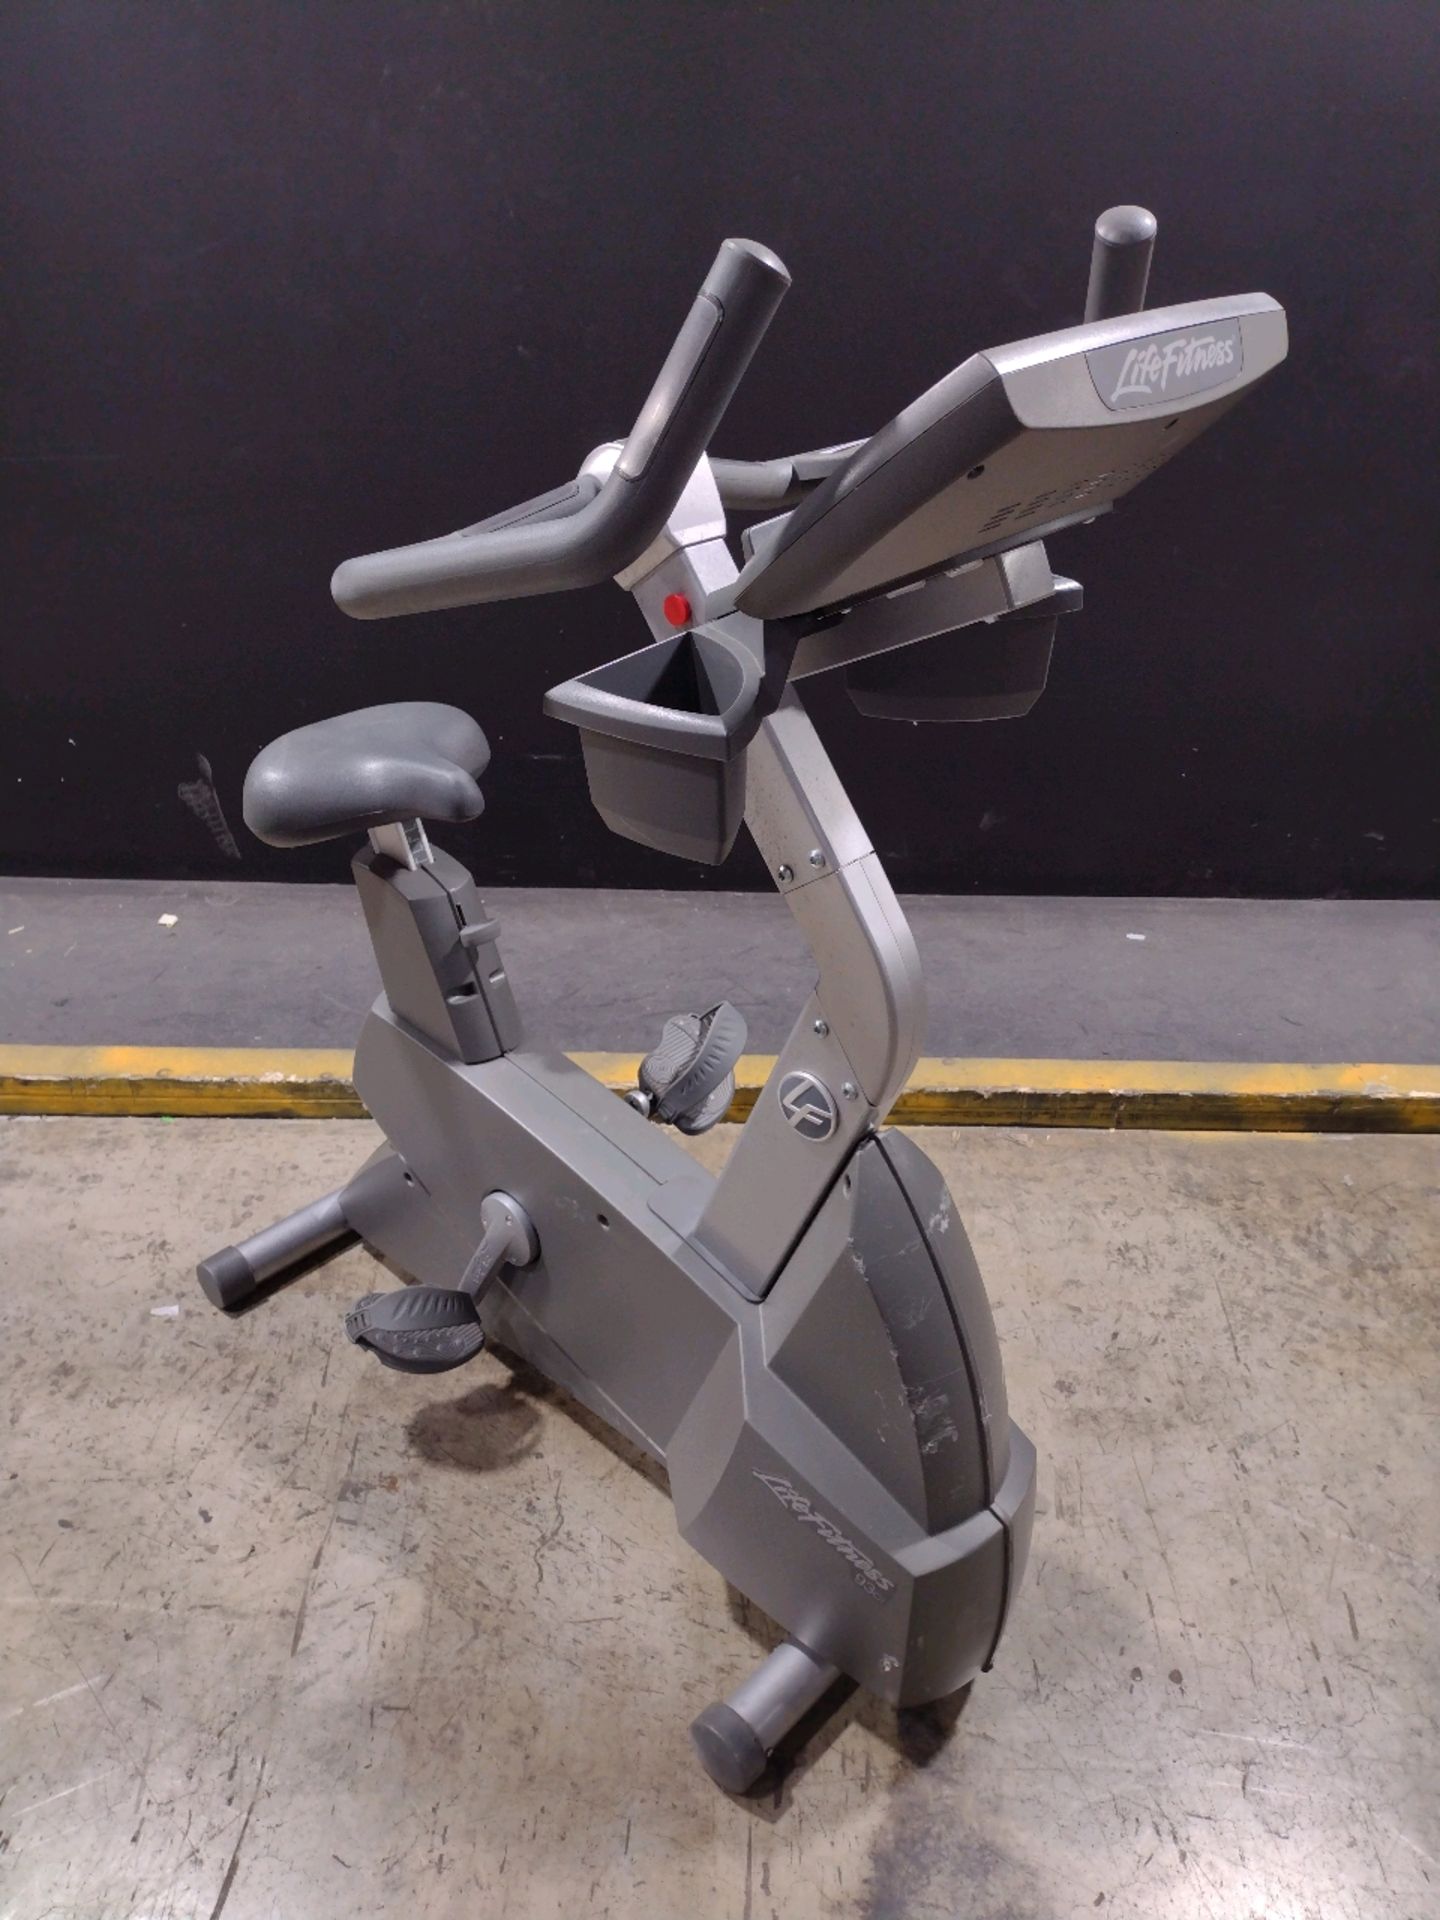 LIFE FITNESS 93CI EXERCISE BIKE (LOCATED AT 3325 MOUNT PROSPECT ROAD, FRANKLIN PARK, IL, 60131)